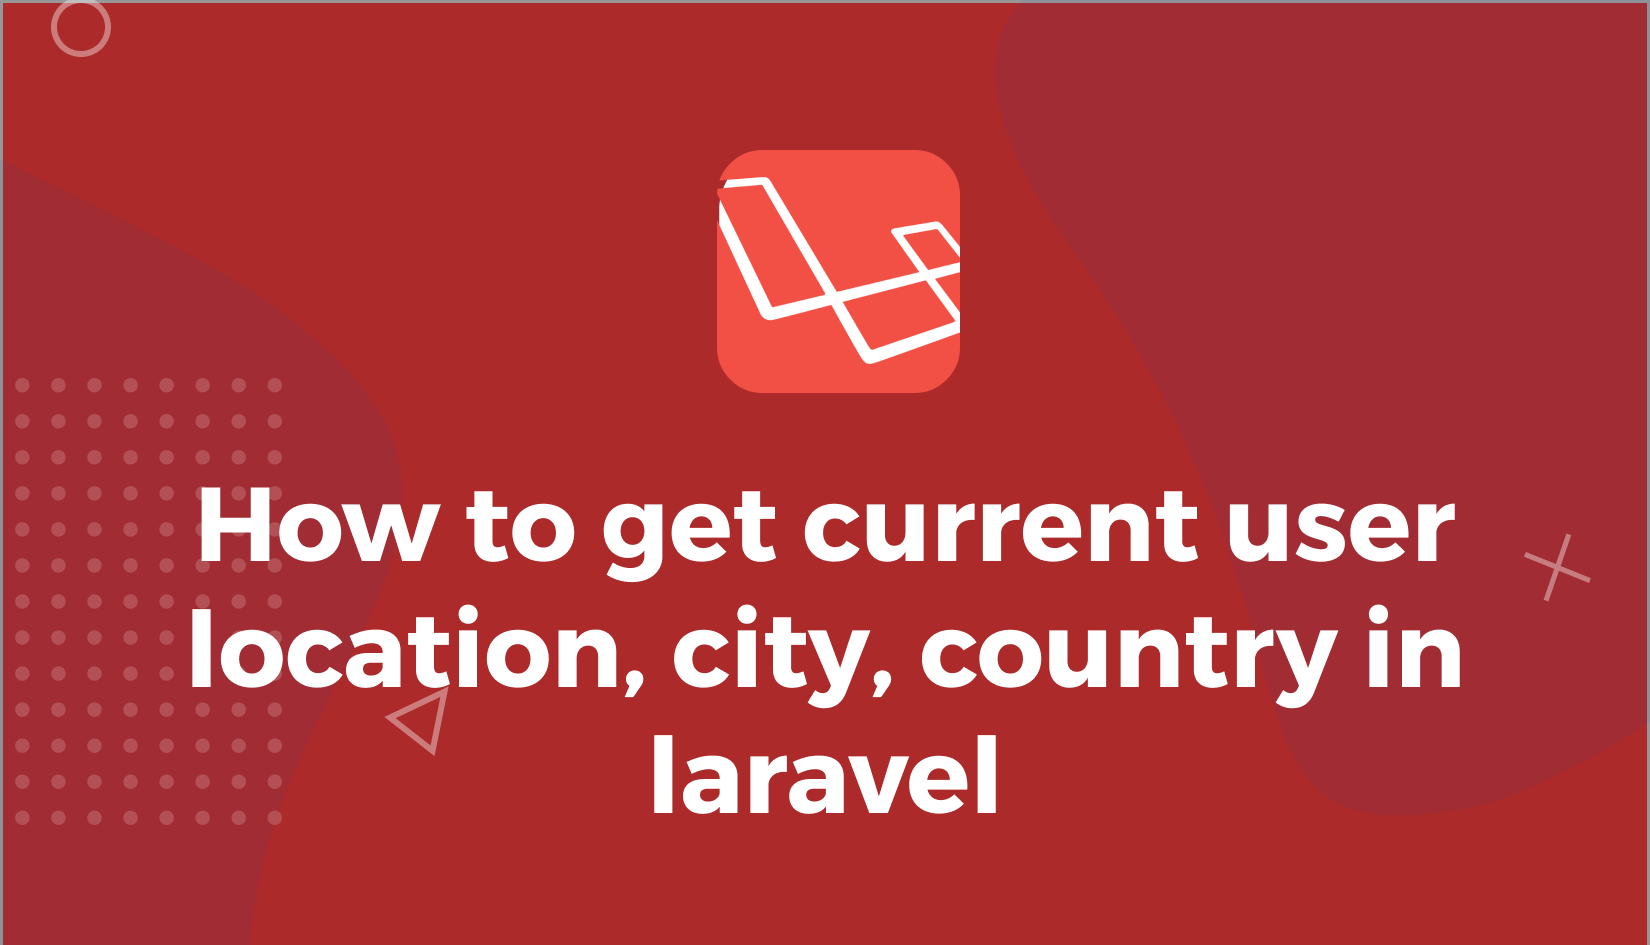 How to get current user location, city, country in laravel